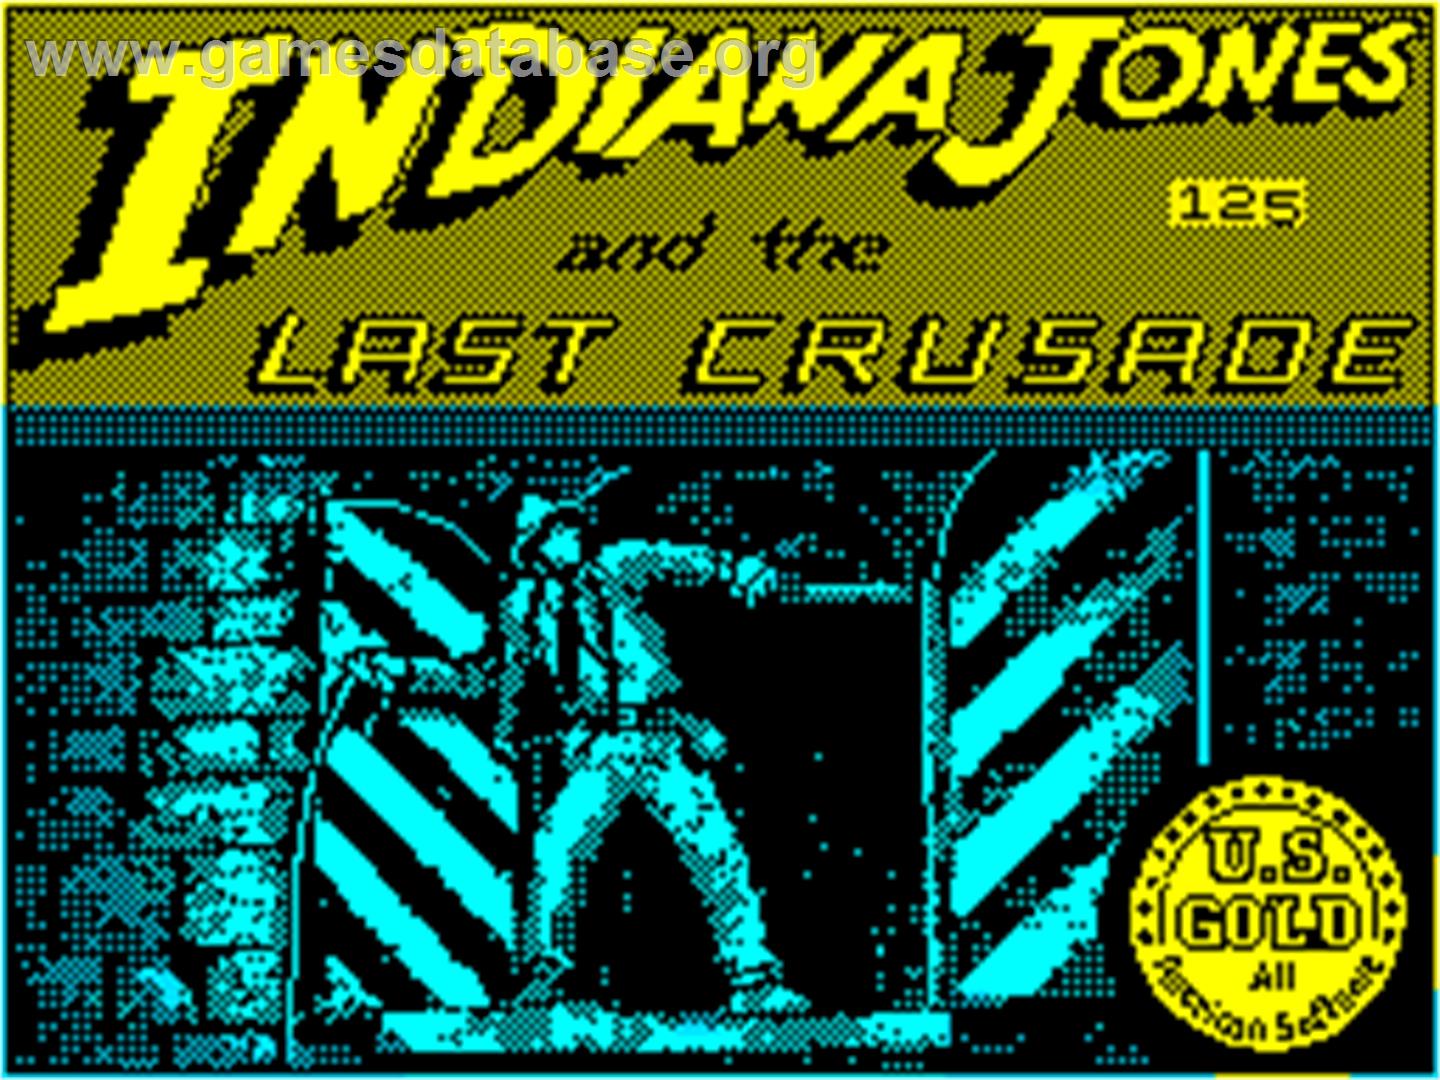 Indiana Jones and the Last Crusade: The Action Game - Sinclair ZX Spectrum - Artwork - Title Screen